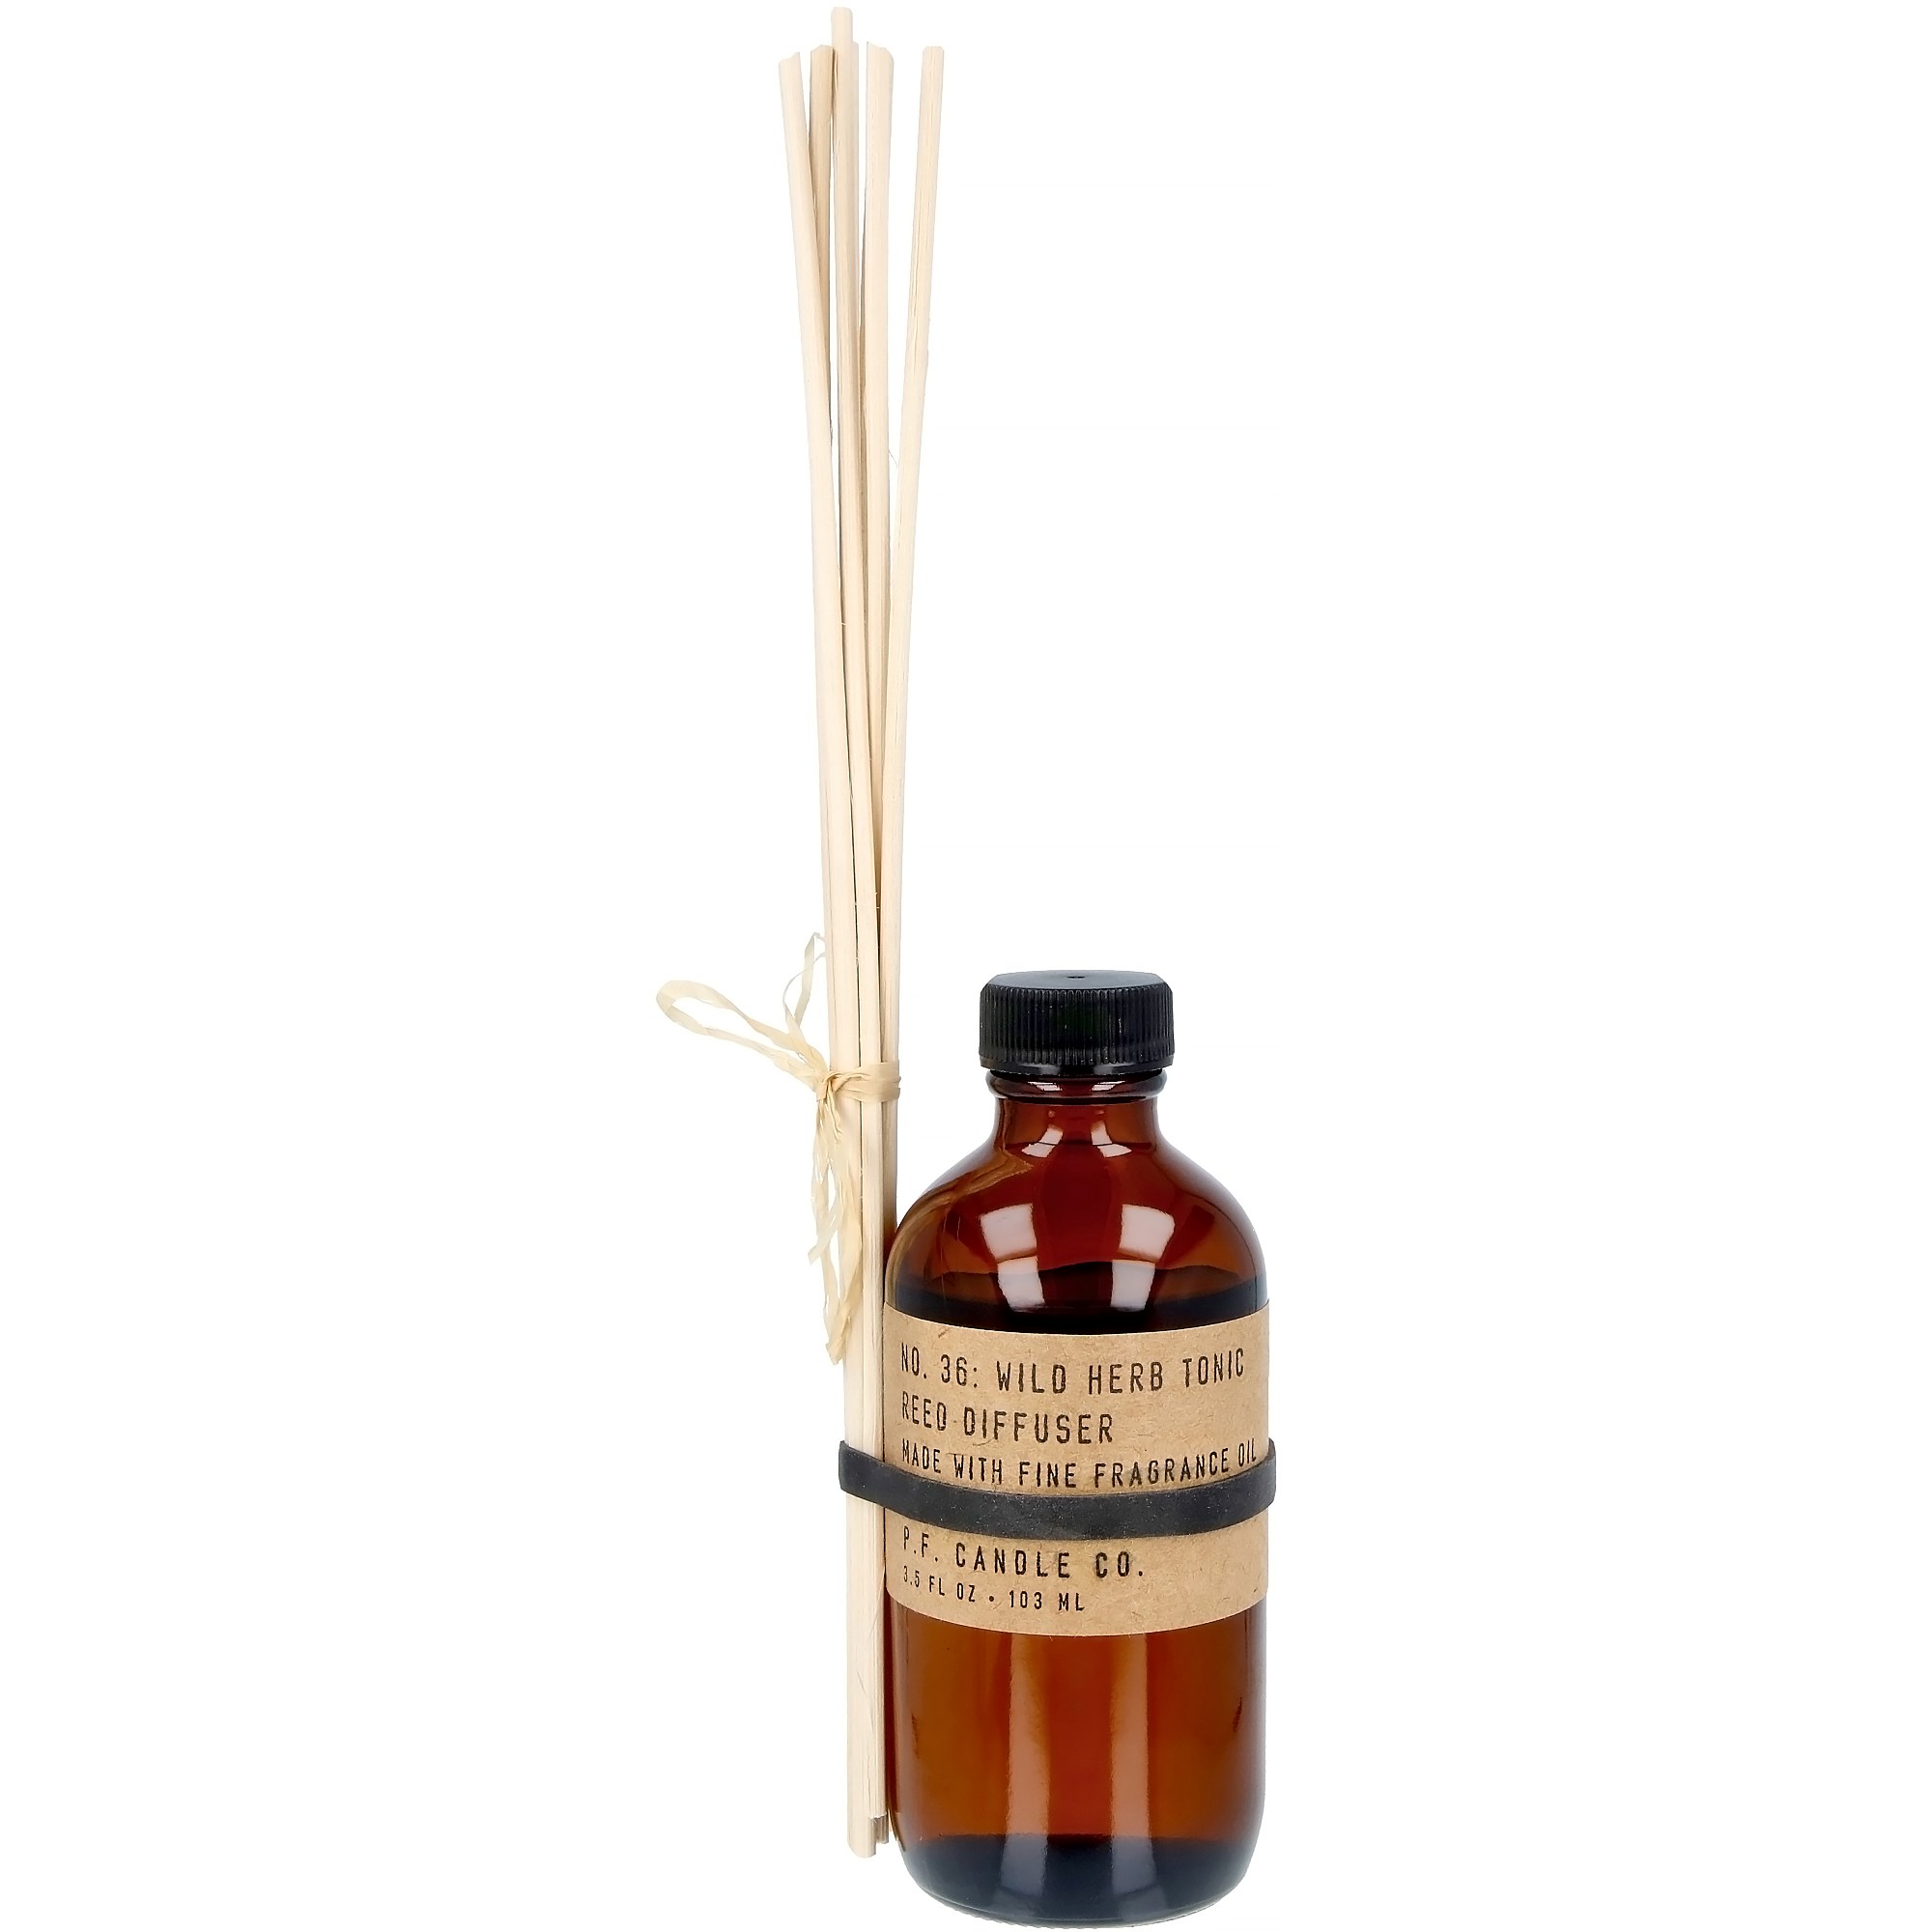 P.F. Candle Co. Wild Herb Tonic Reed Diffuser 103 ml